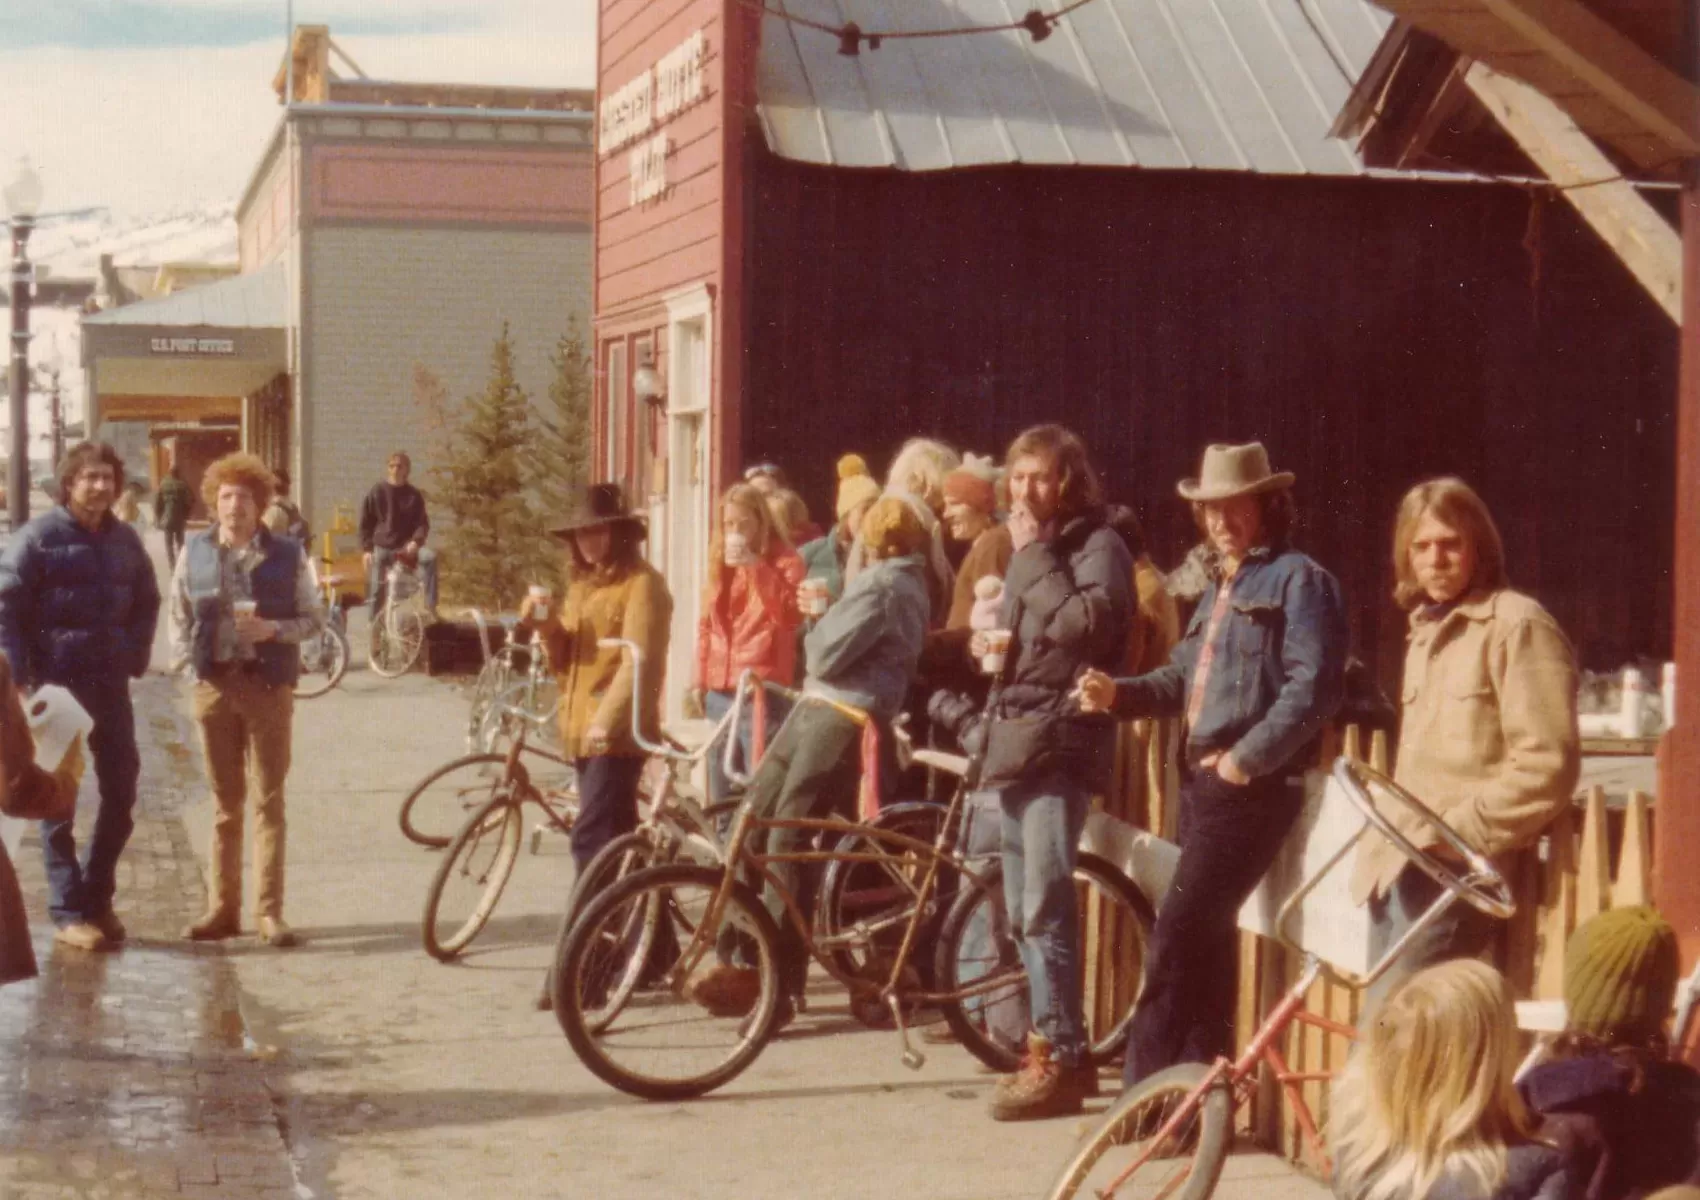 Some of the world's first mountain bikers stand by their klunker bikes in downtown Crested Butte.